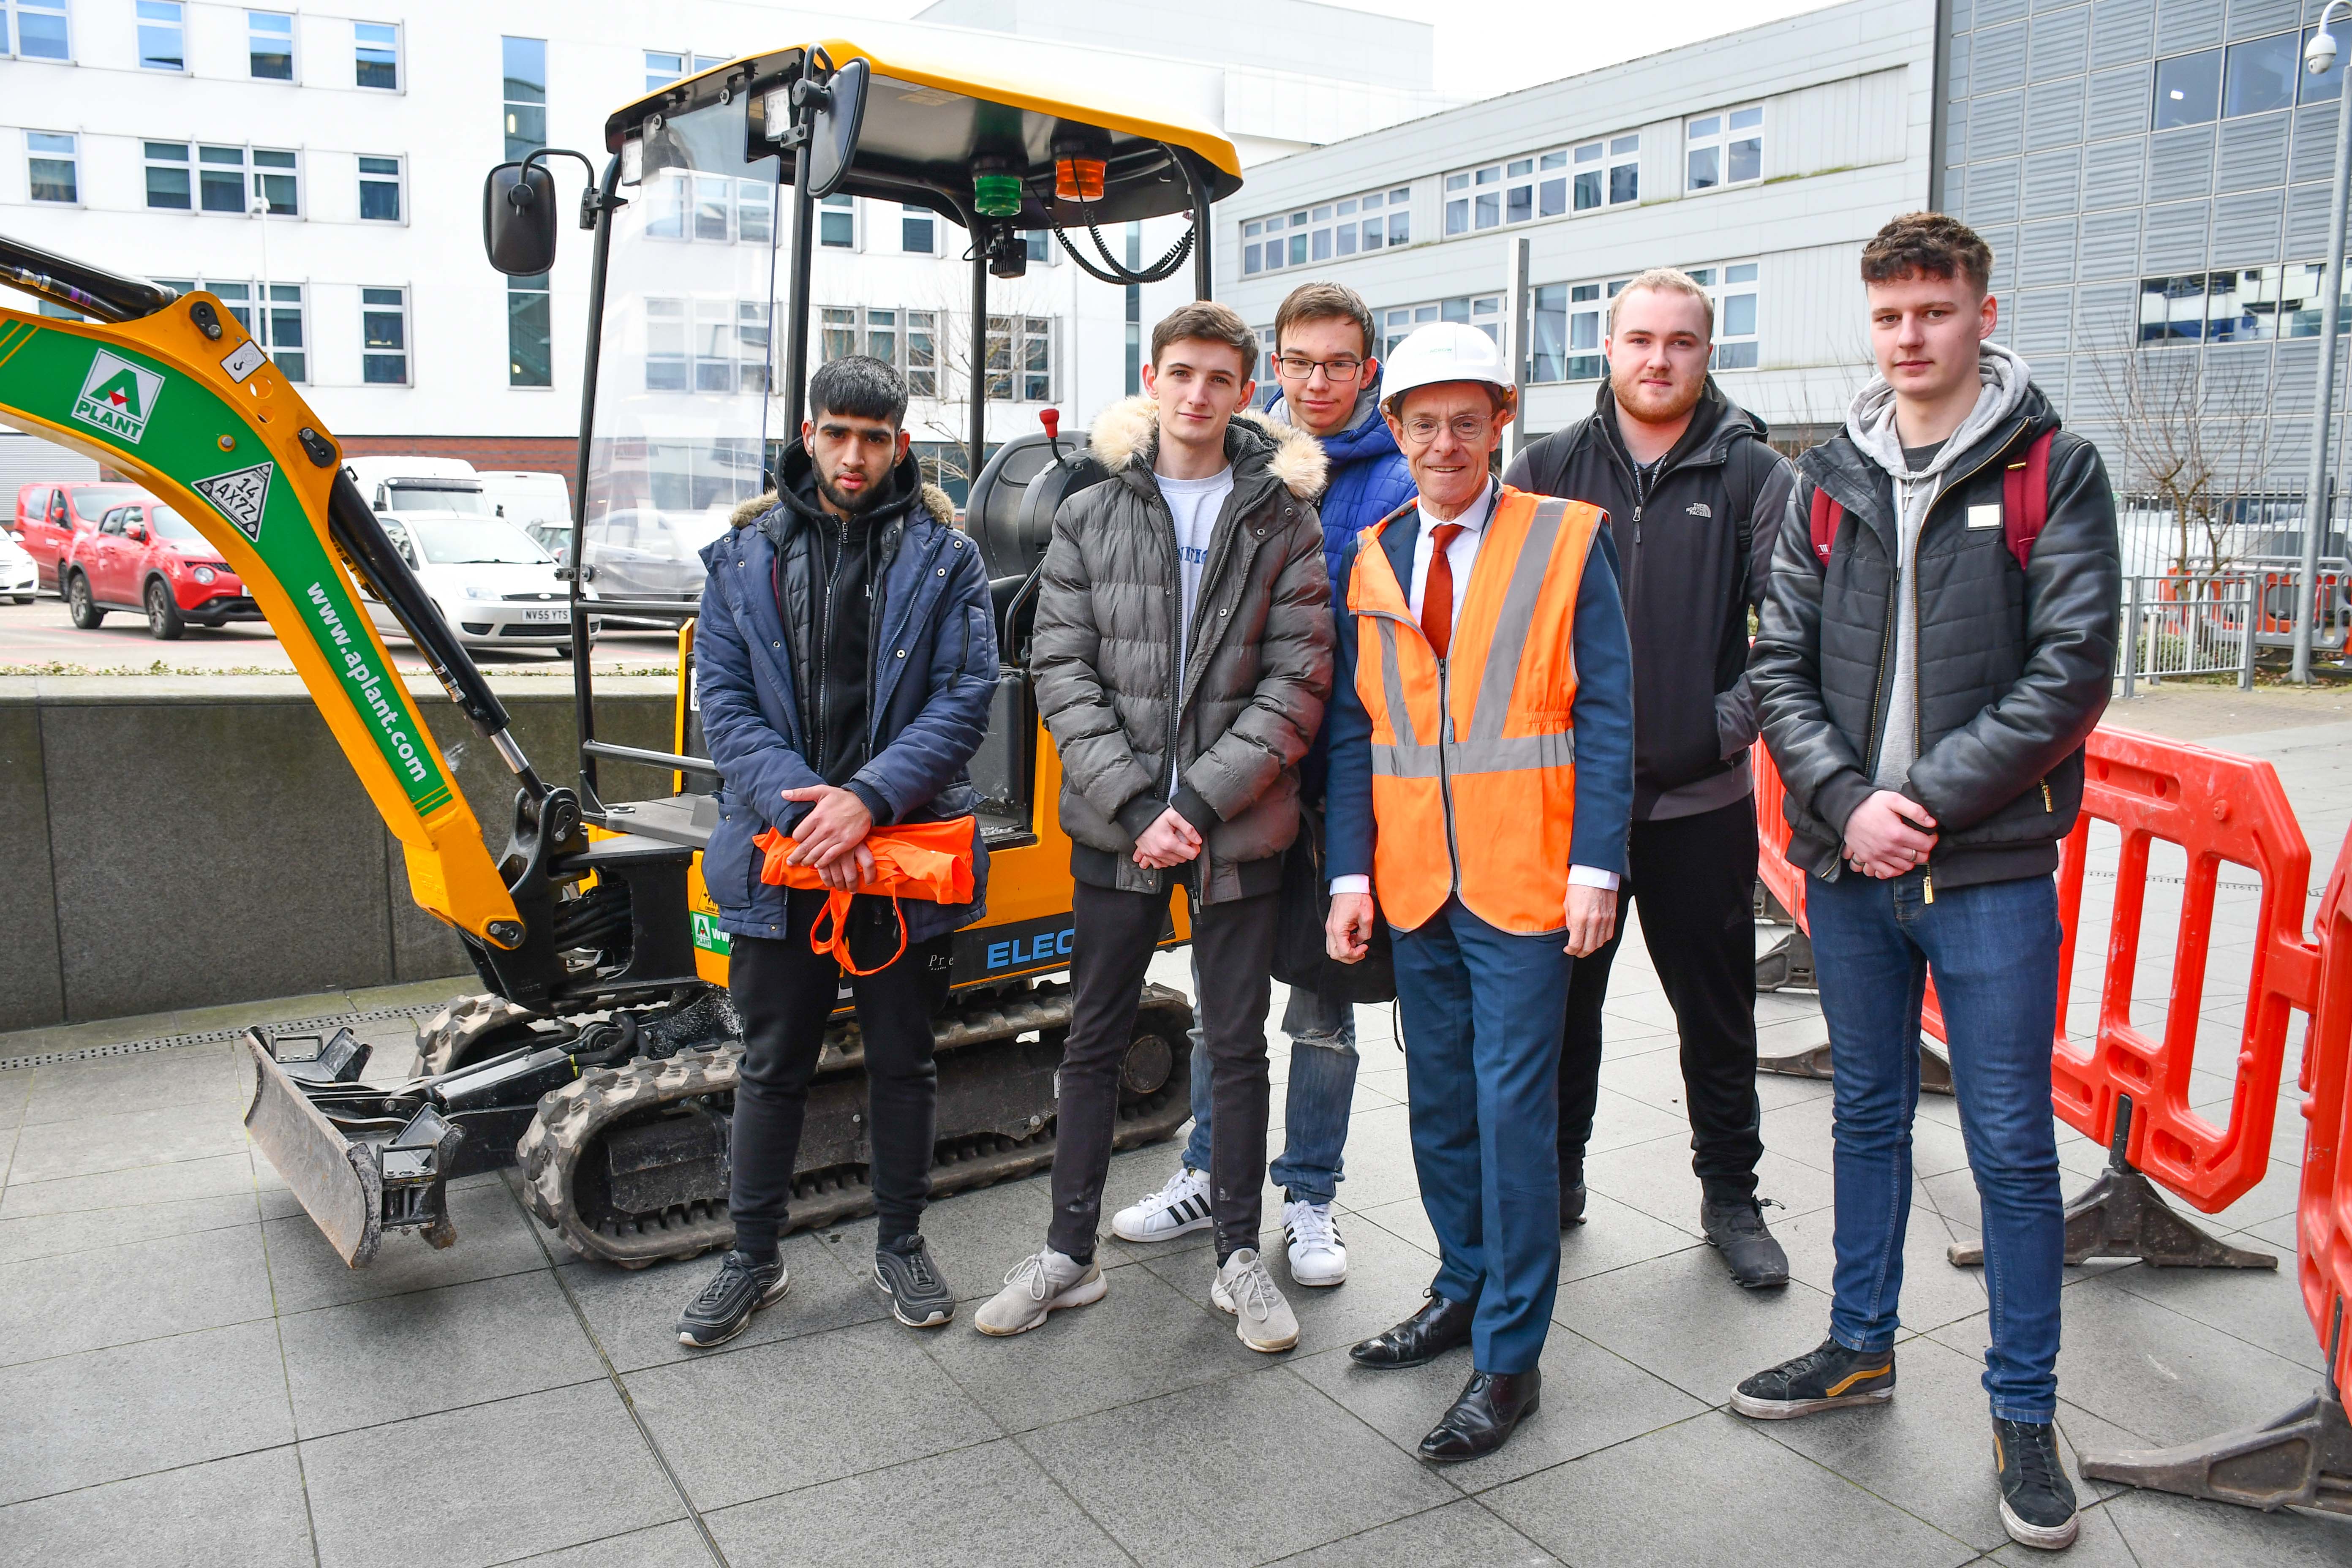 Mayor of the West Midlands Andy Street (fourth from left) meets (L-R) students Ibrahim Ali, Thomas Savory, Connor Oldale, Rhys Fieldhouse and Brandon Edwards at Plant Construction Careers Live